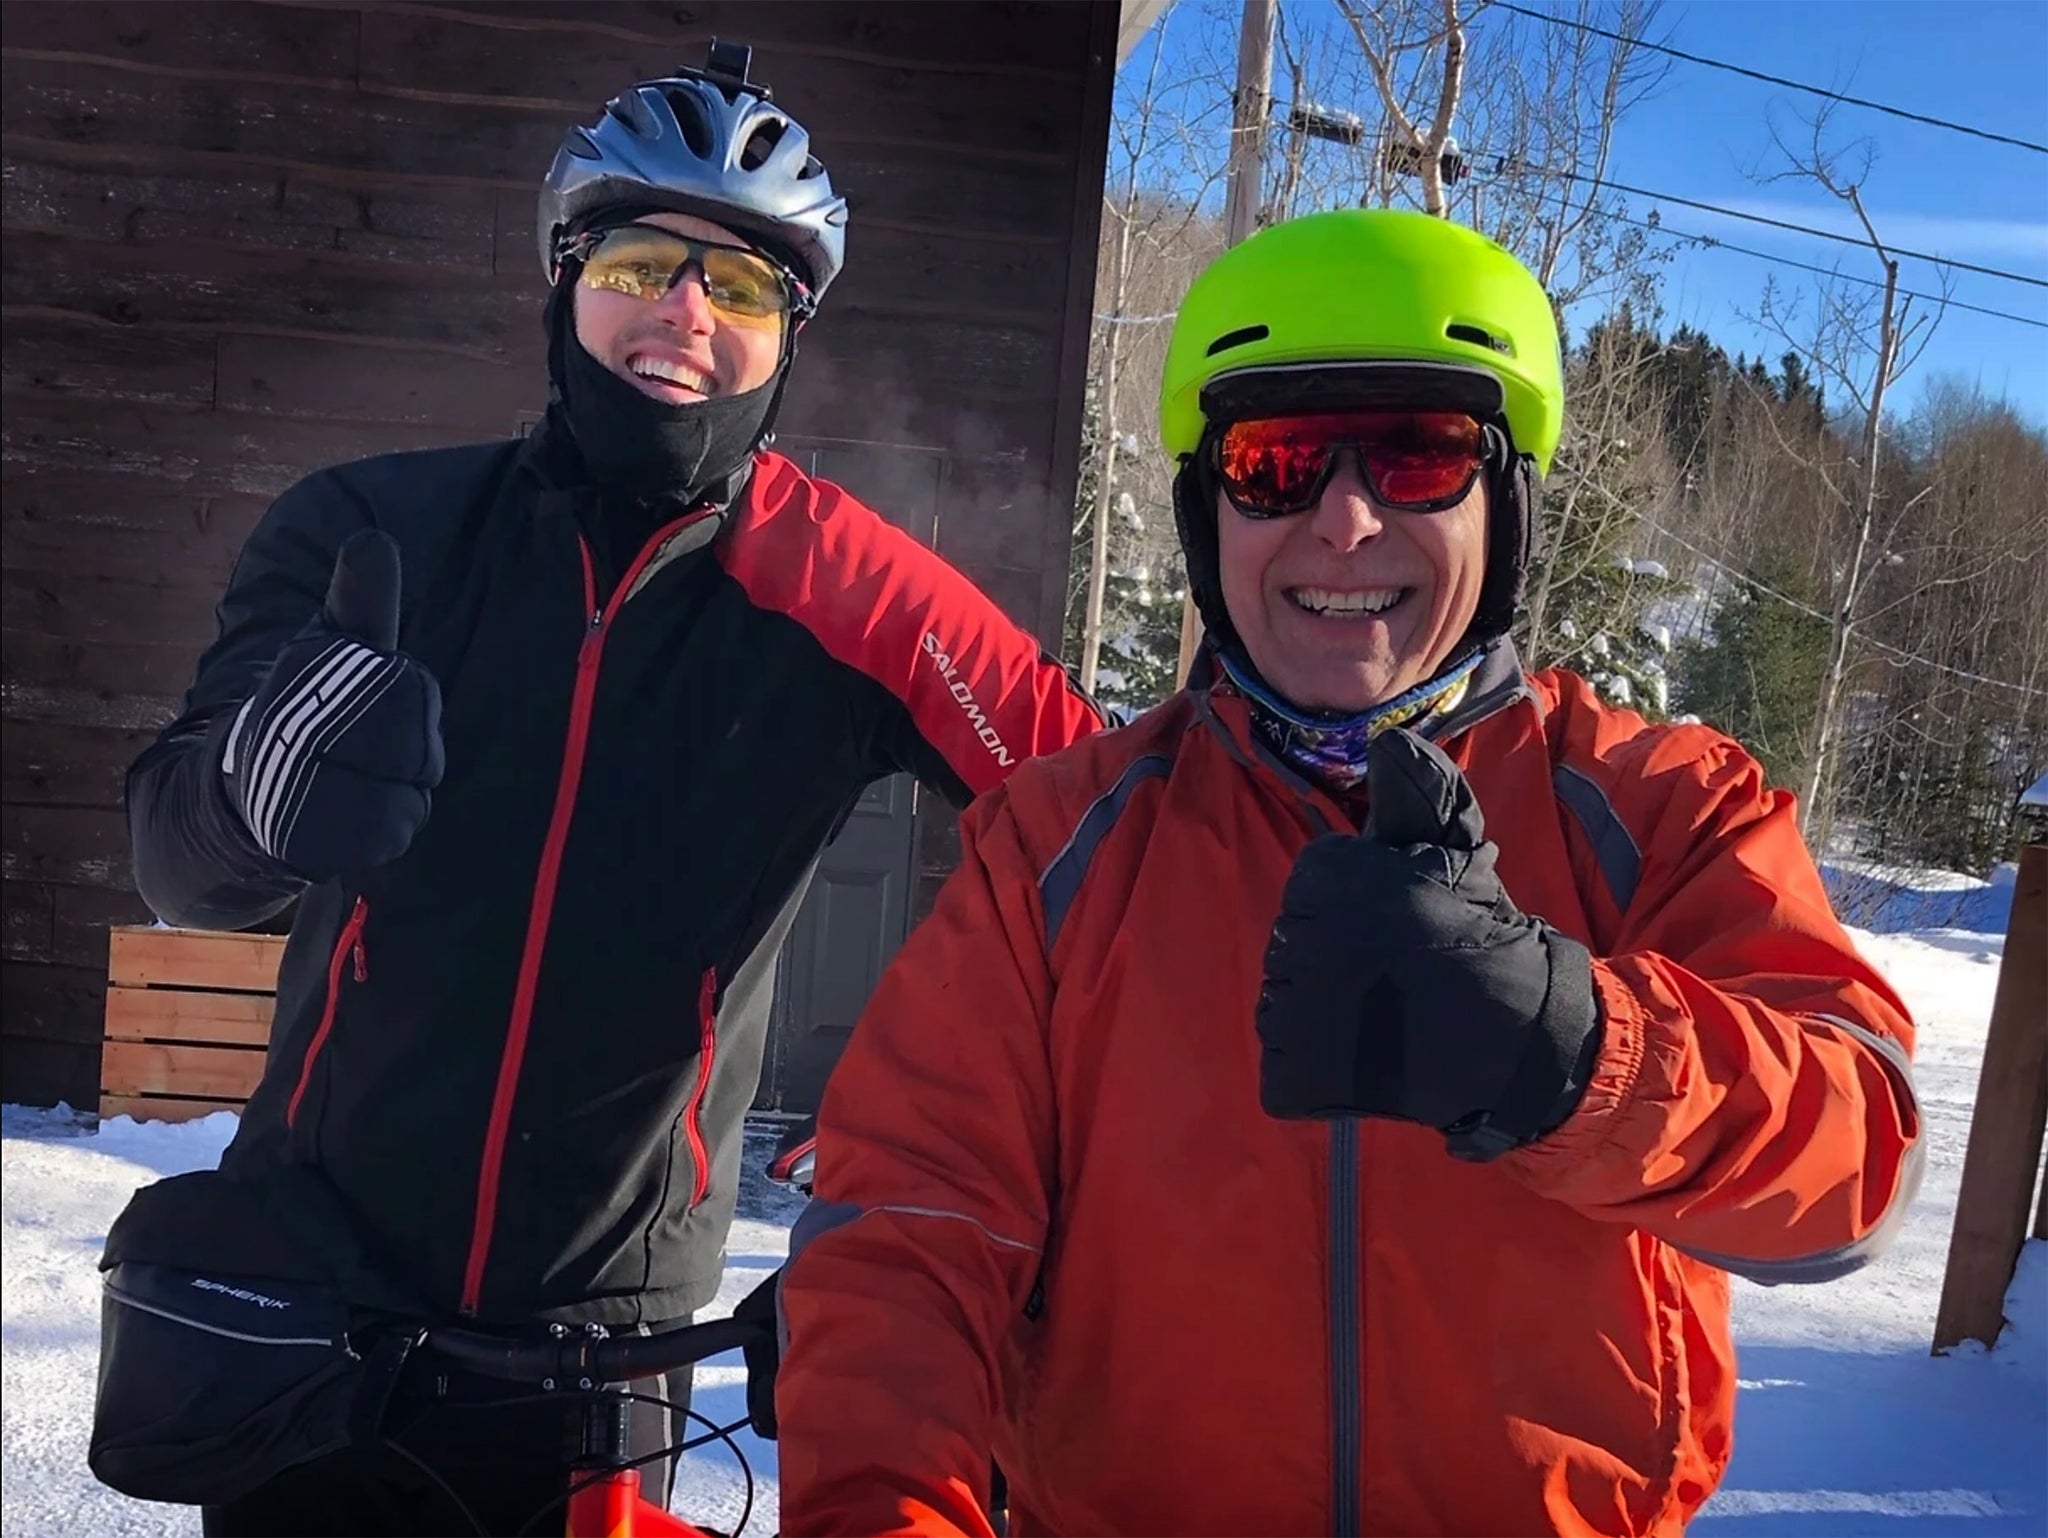 Riding through the cold Canadian Winter with Jean Prévost